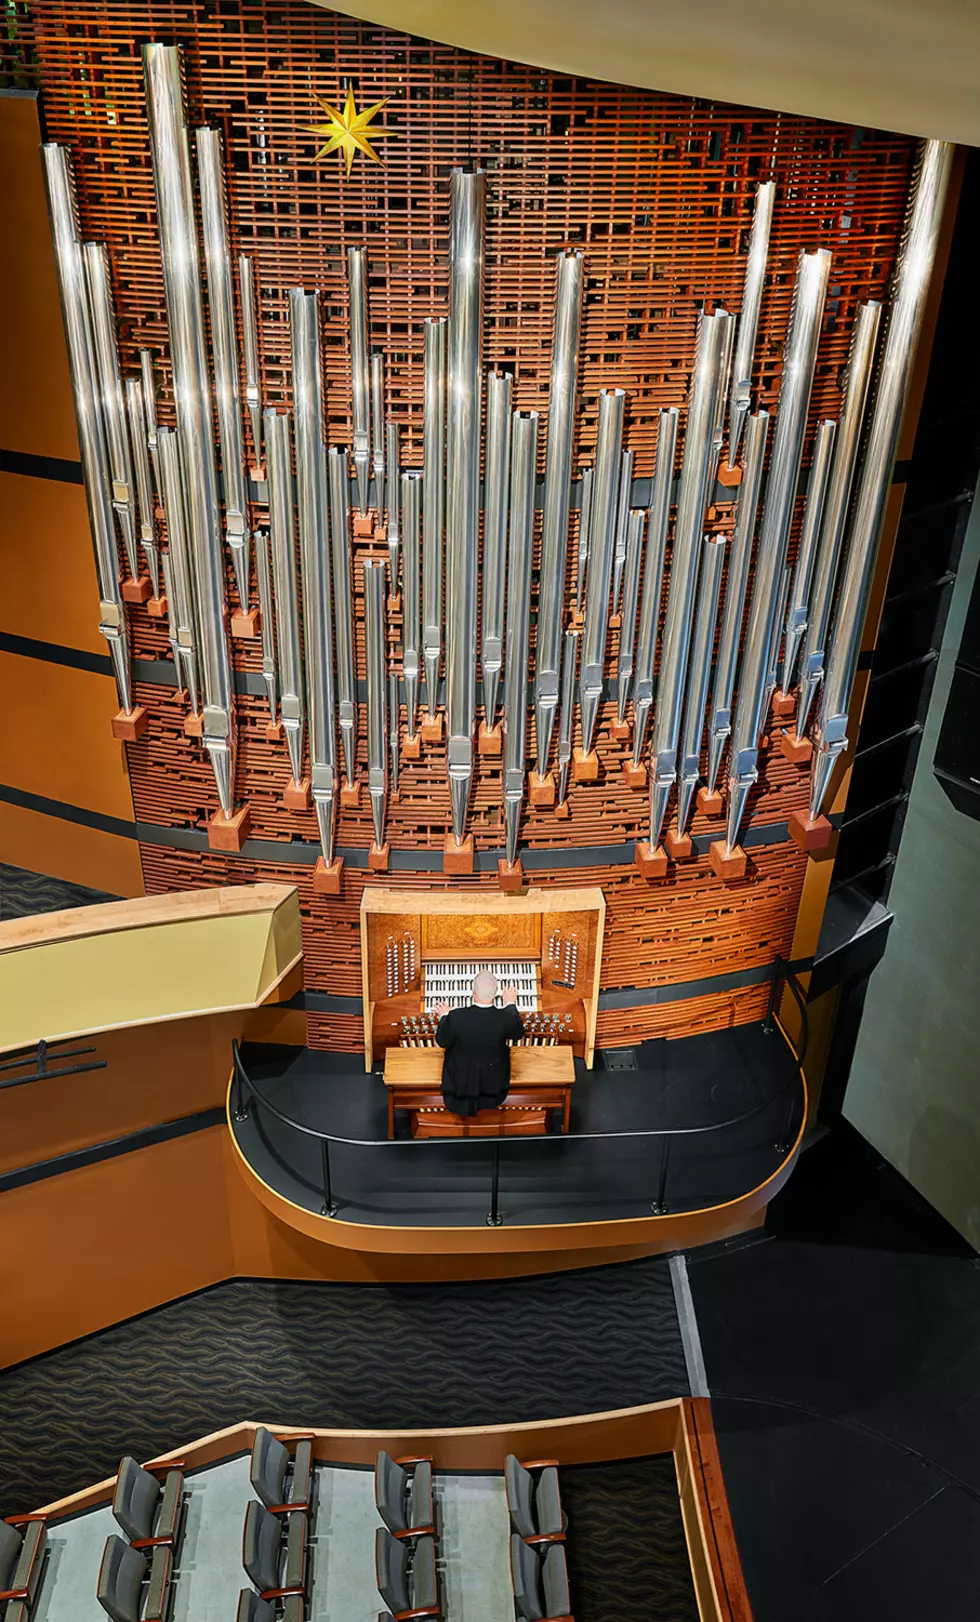 21-Ton Pipe Organ To Debut at University of Dubuque